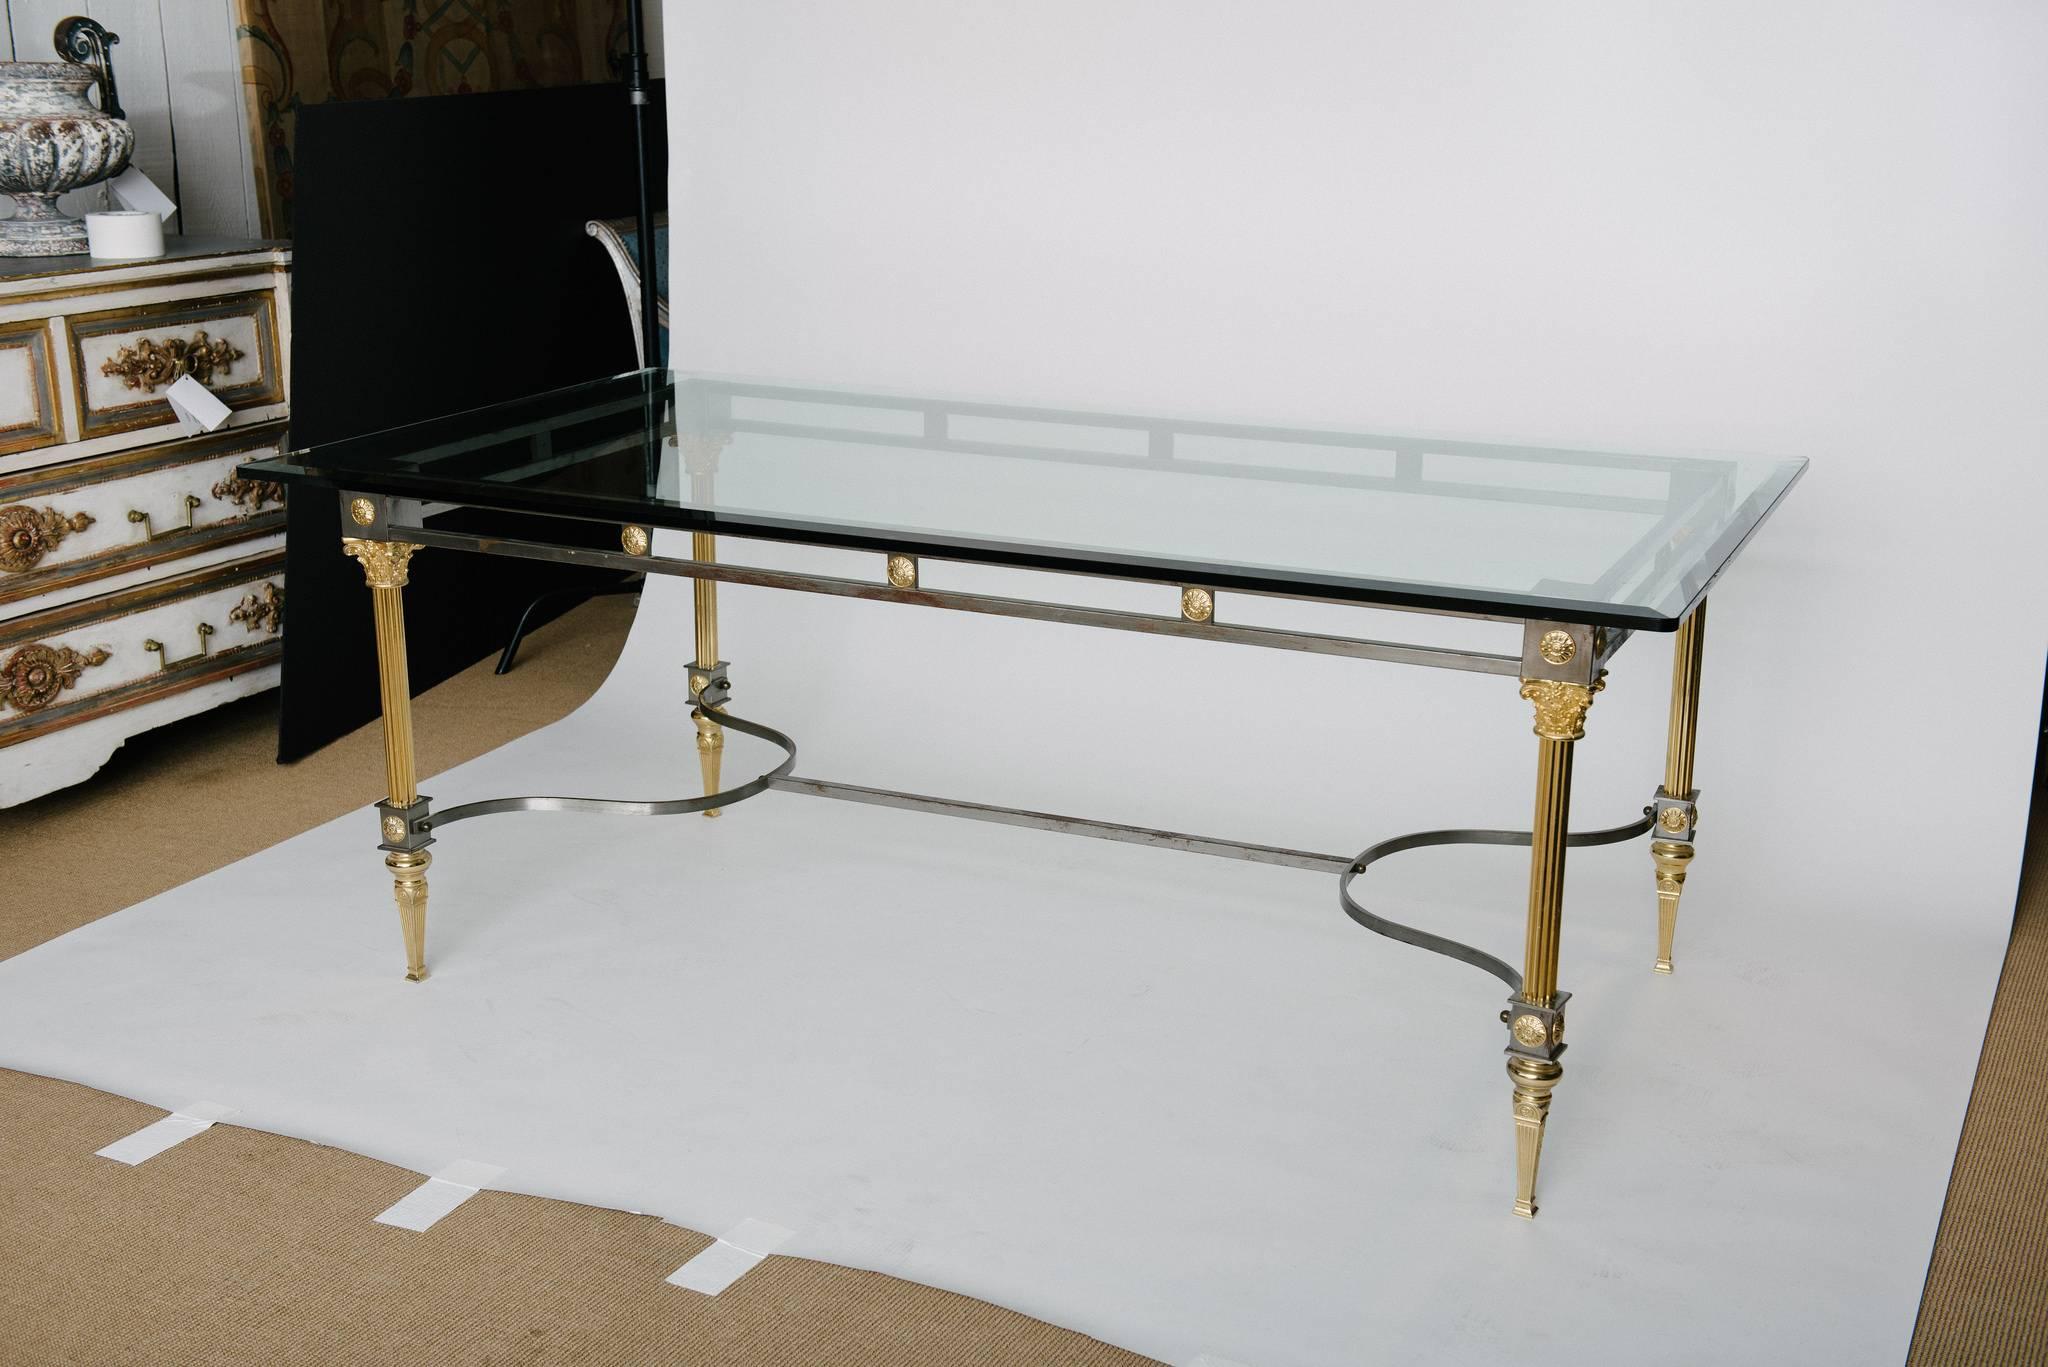 Steel and brass dining table by Maison Jansen. Features Corinthian style capitols with fluted columns on each corner supporting the top with gilt French rosettes. The table has a lovely patina on the steel and brass that could be polished or enjoyed